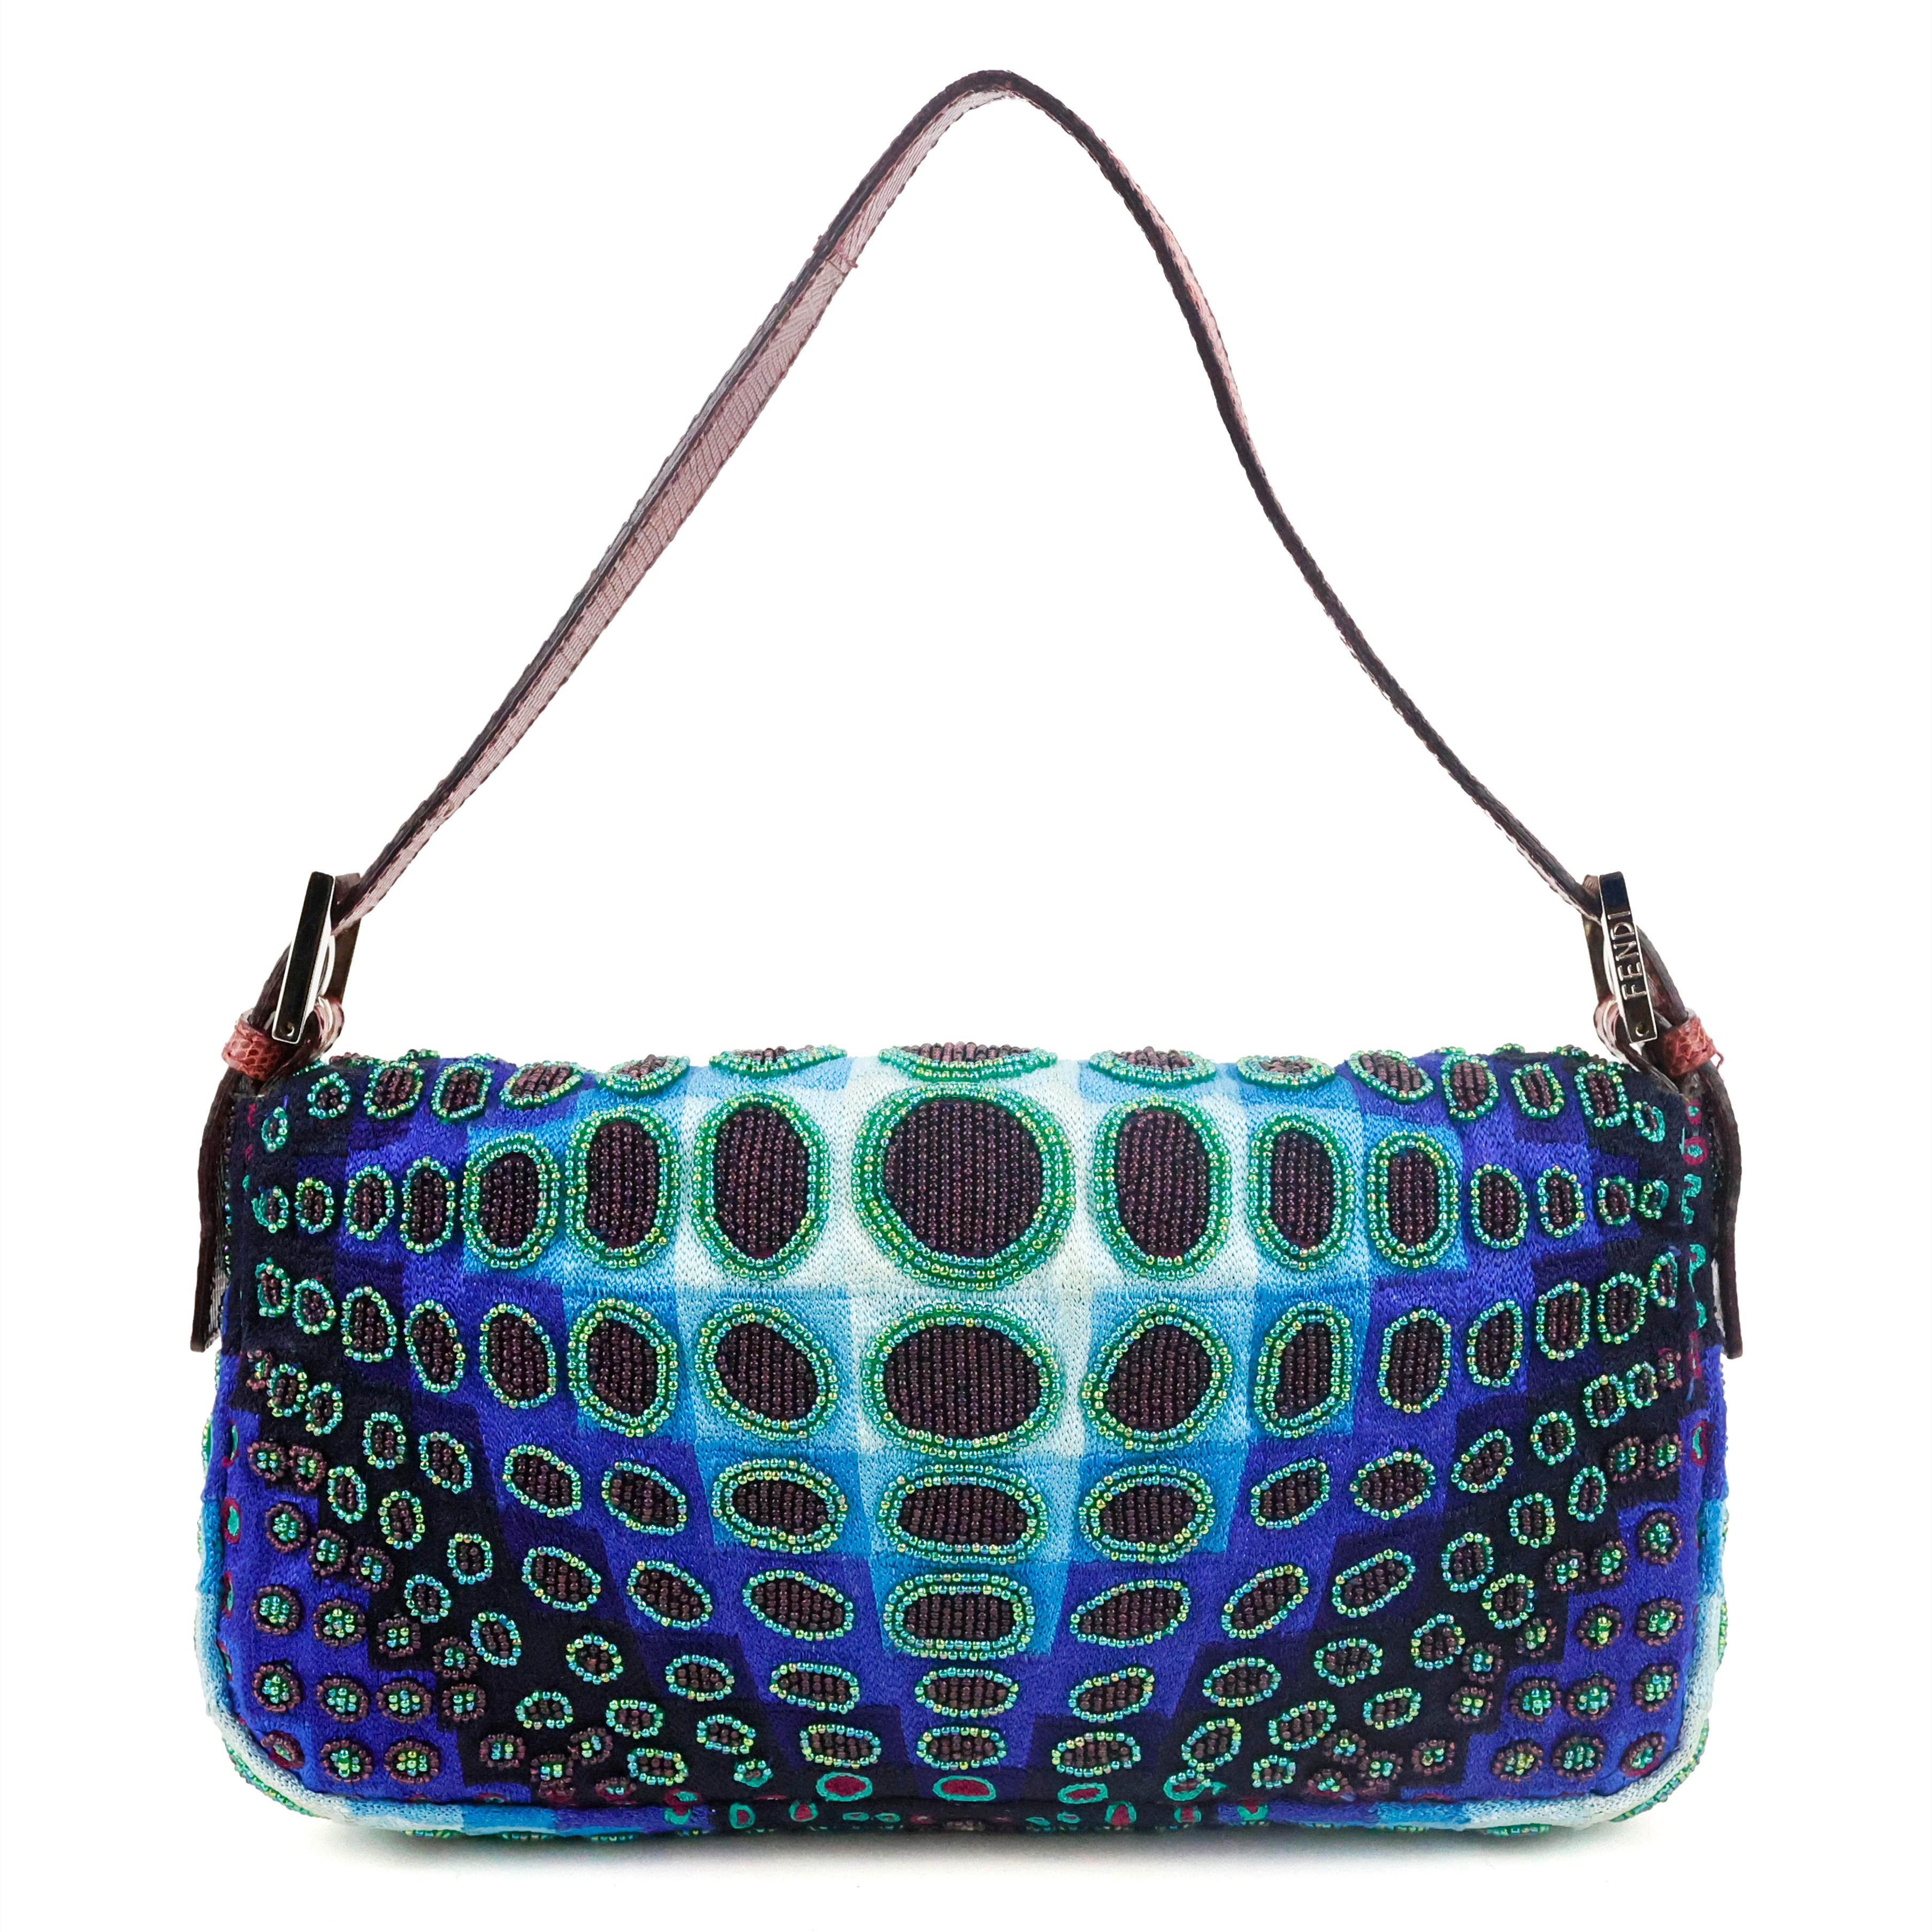 Fendi Vasarely baguette entirely embroidered with circular motifs evoking the works of Victor Vasarely. With parts in purple-pink lizard leather, green silk interior. Double F clasp embellished with a natural Malachite stone. Stunning and unique